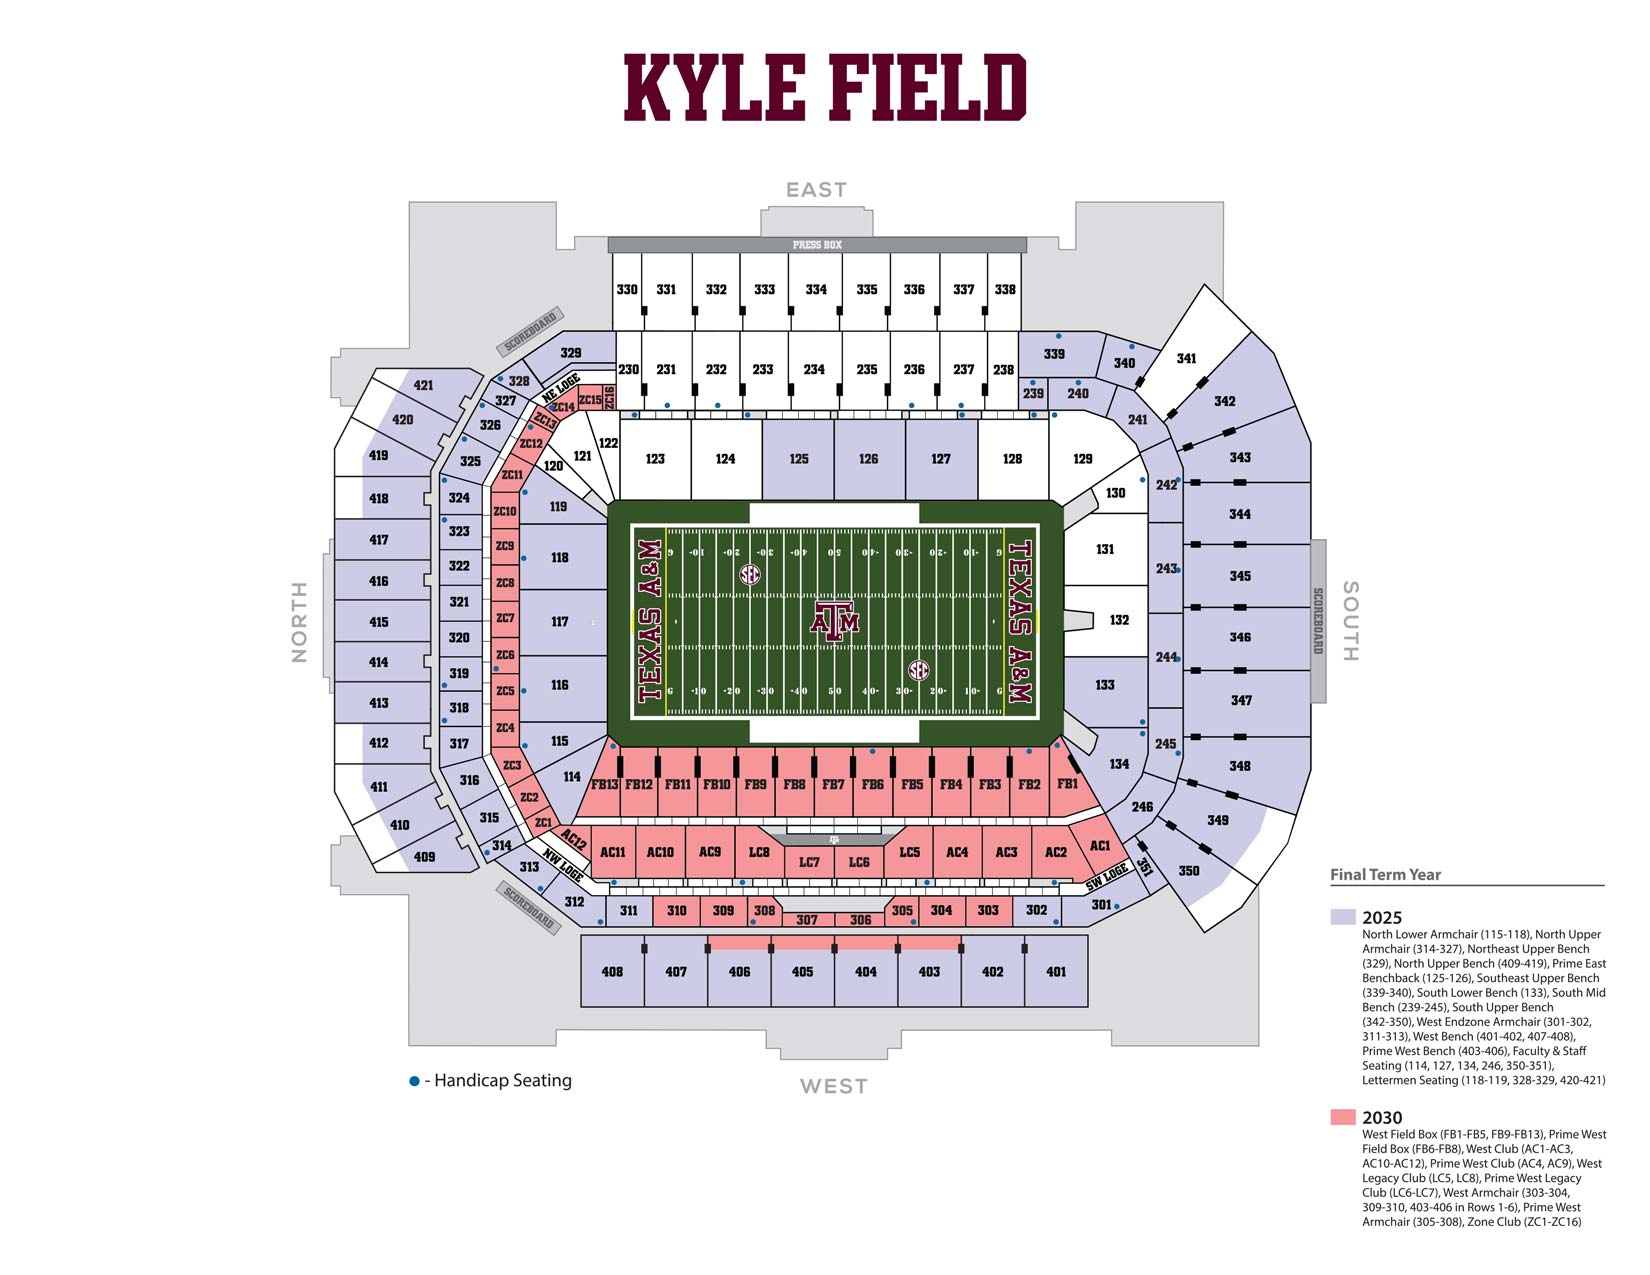 kyle field final term years graphic